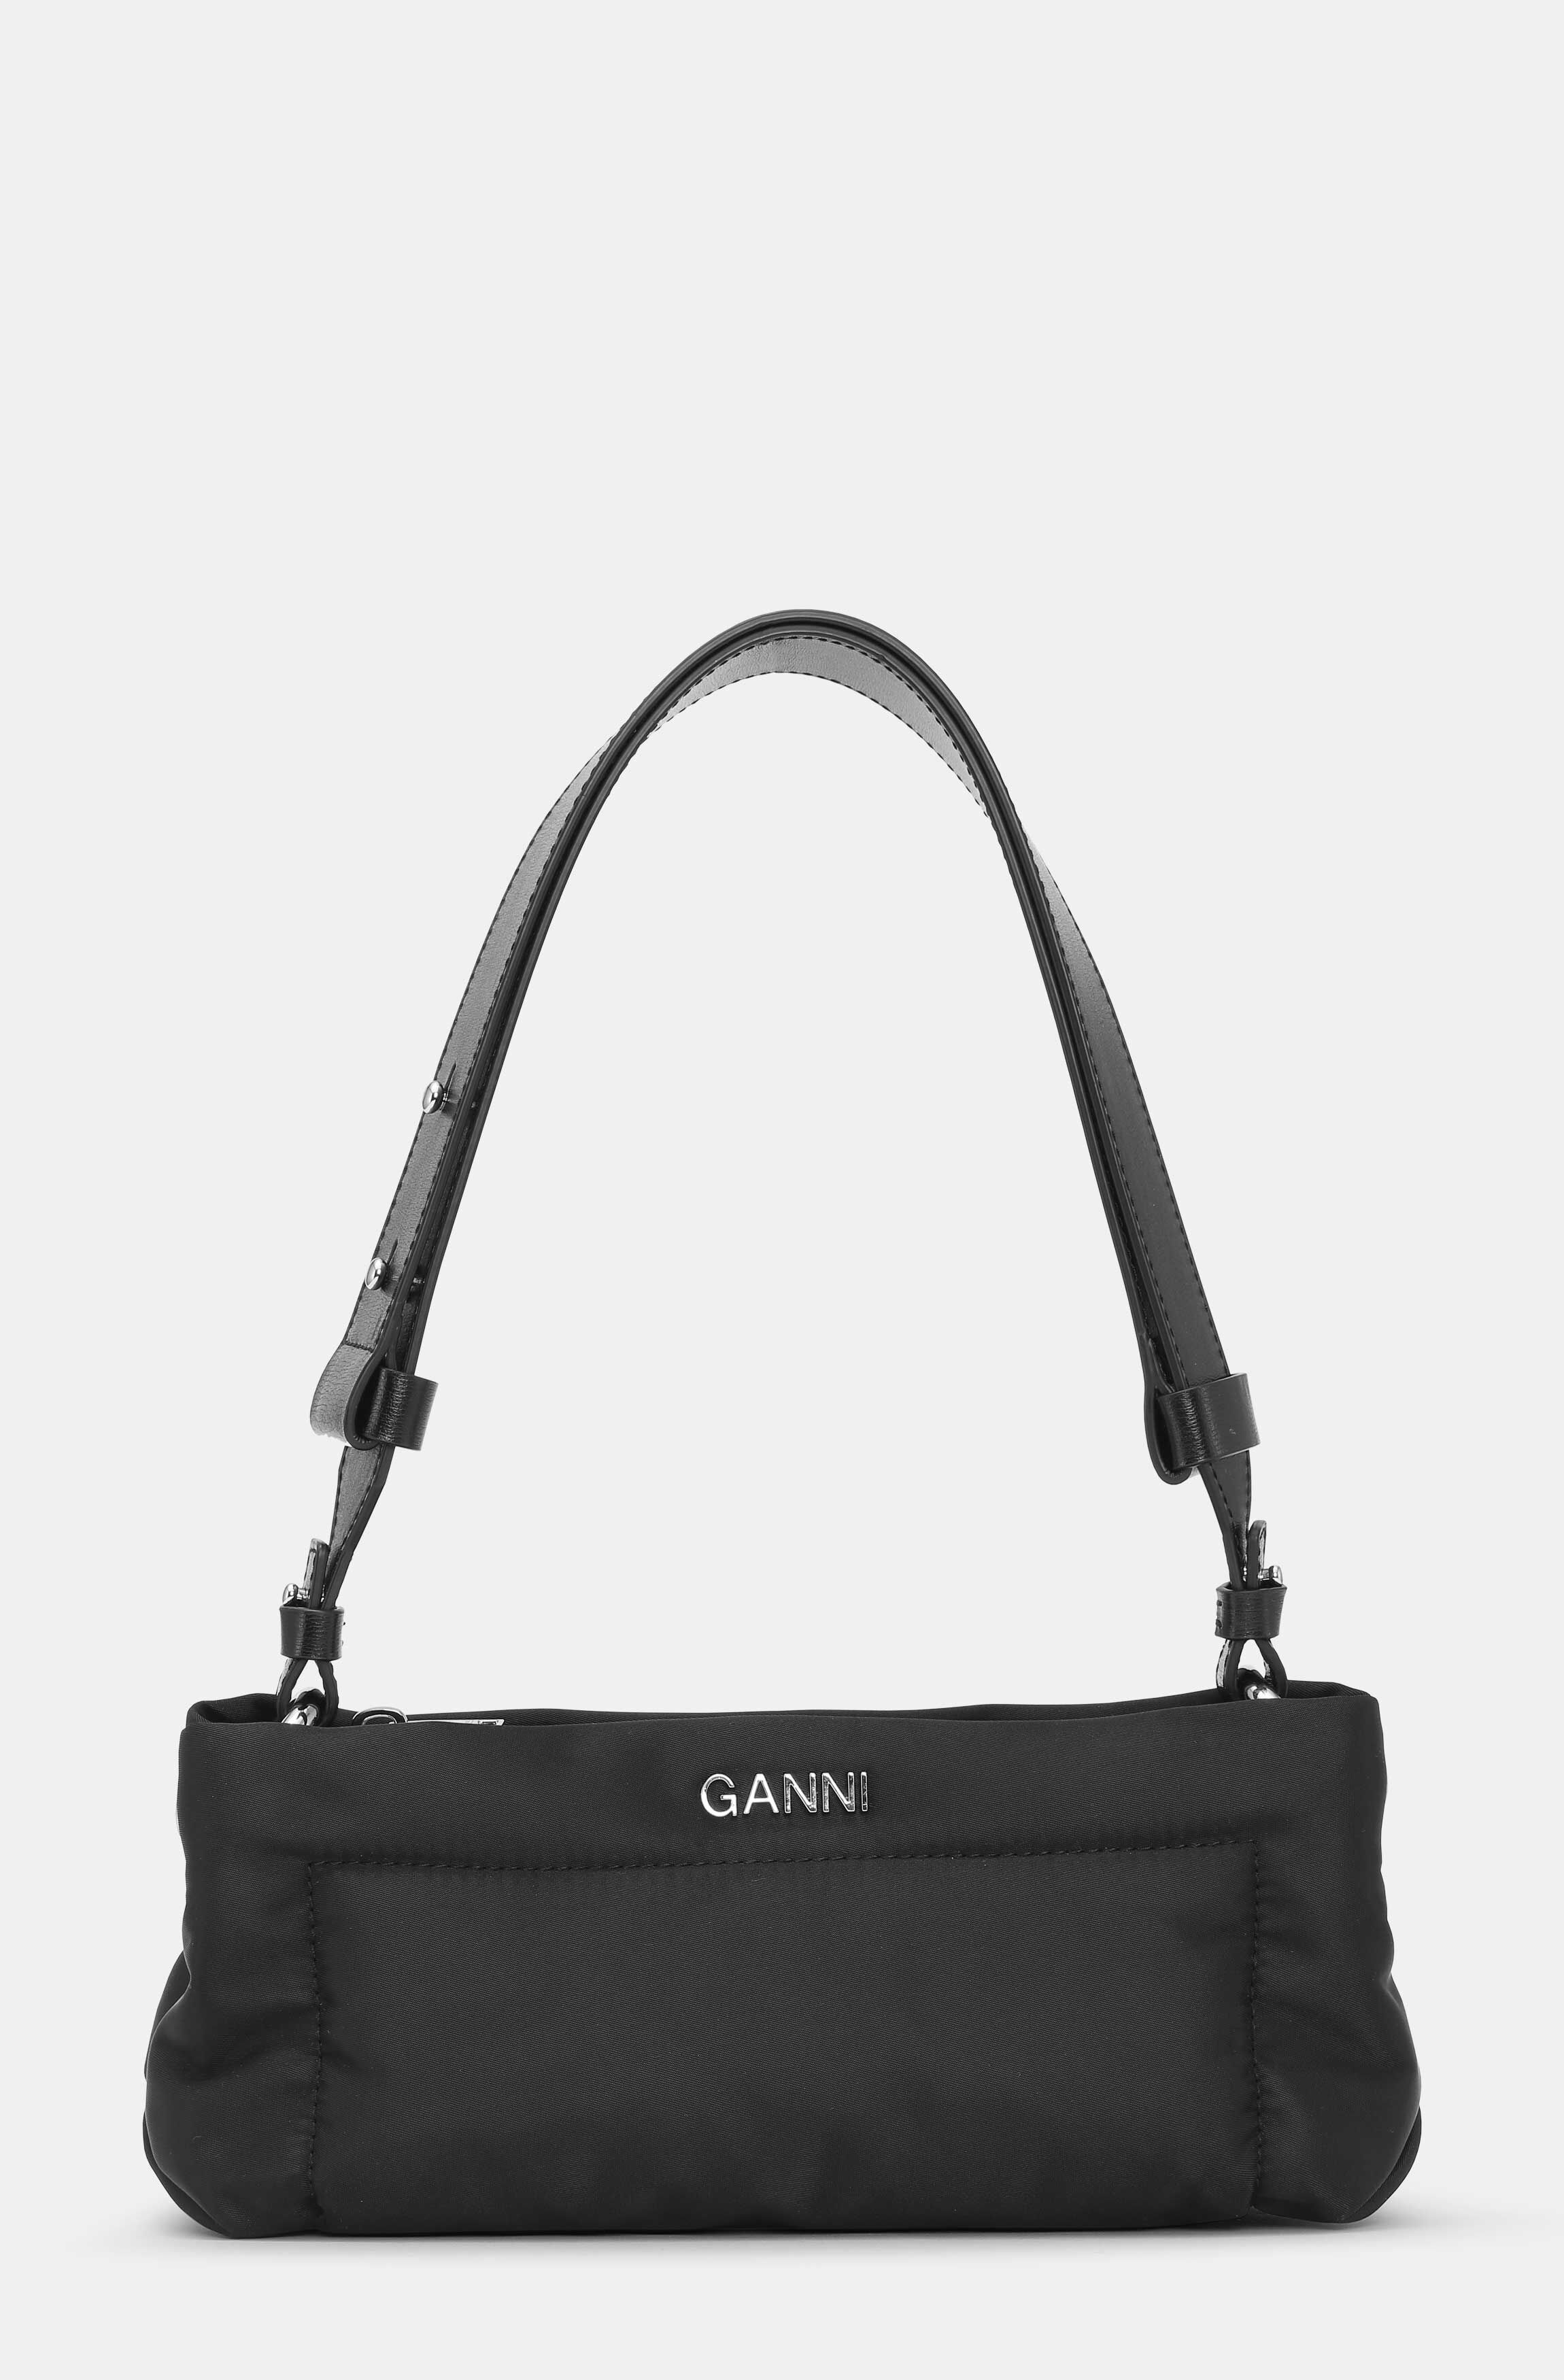 Women's Accessories | Hats, Bags, Scarves & Gloves | GANNI